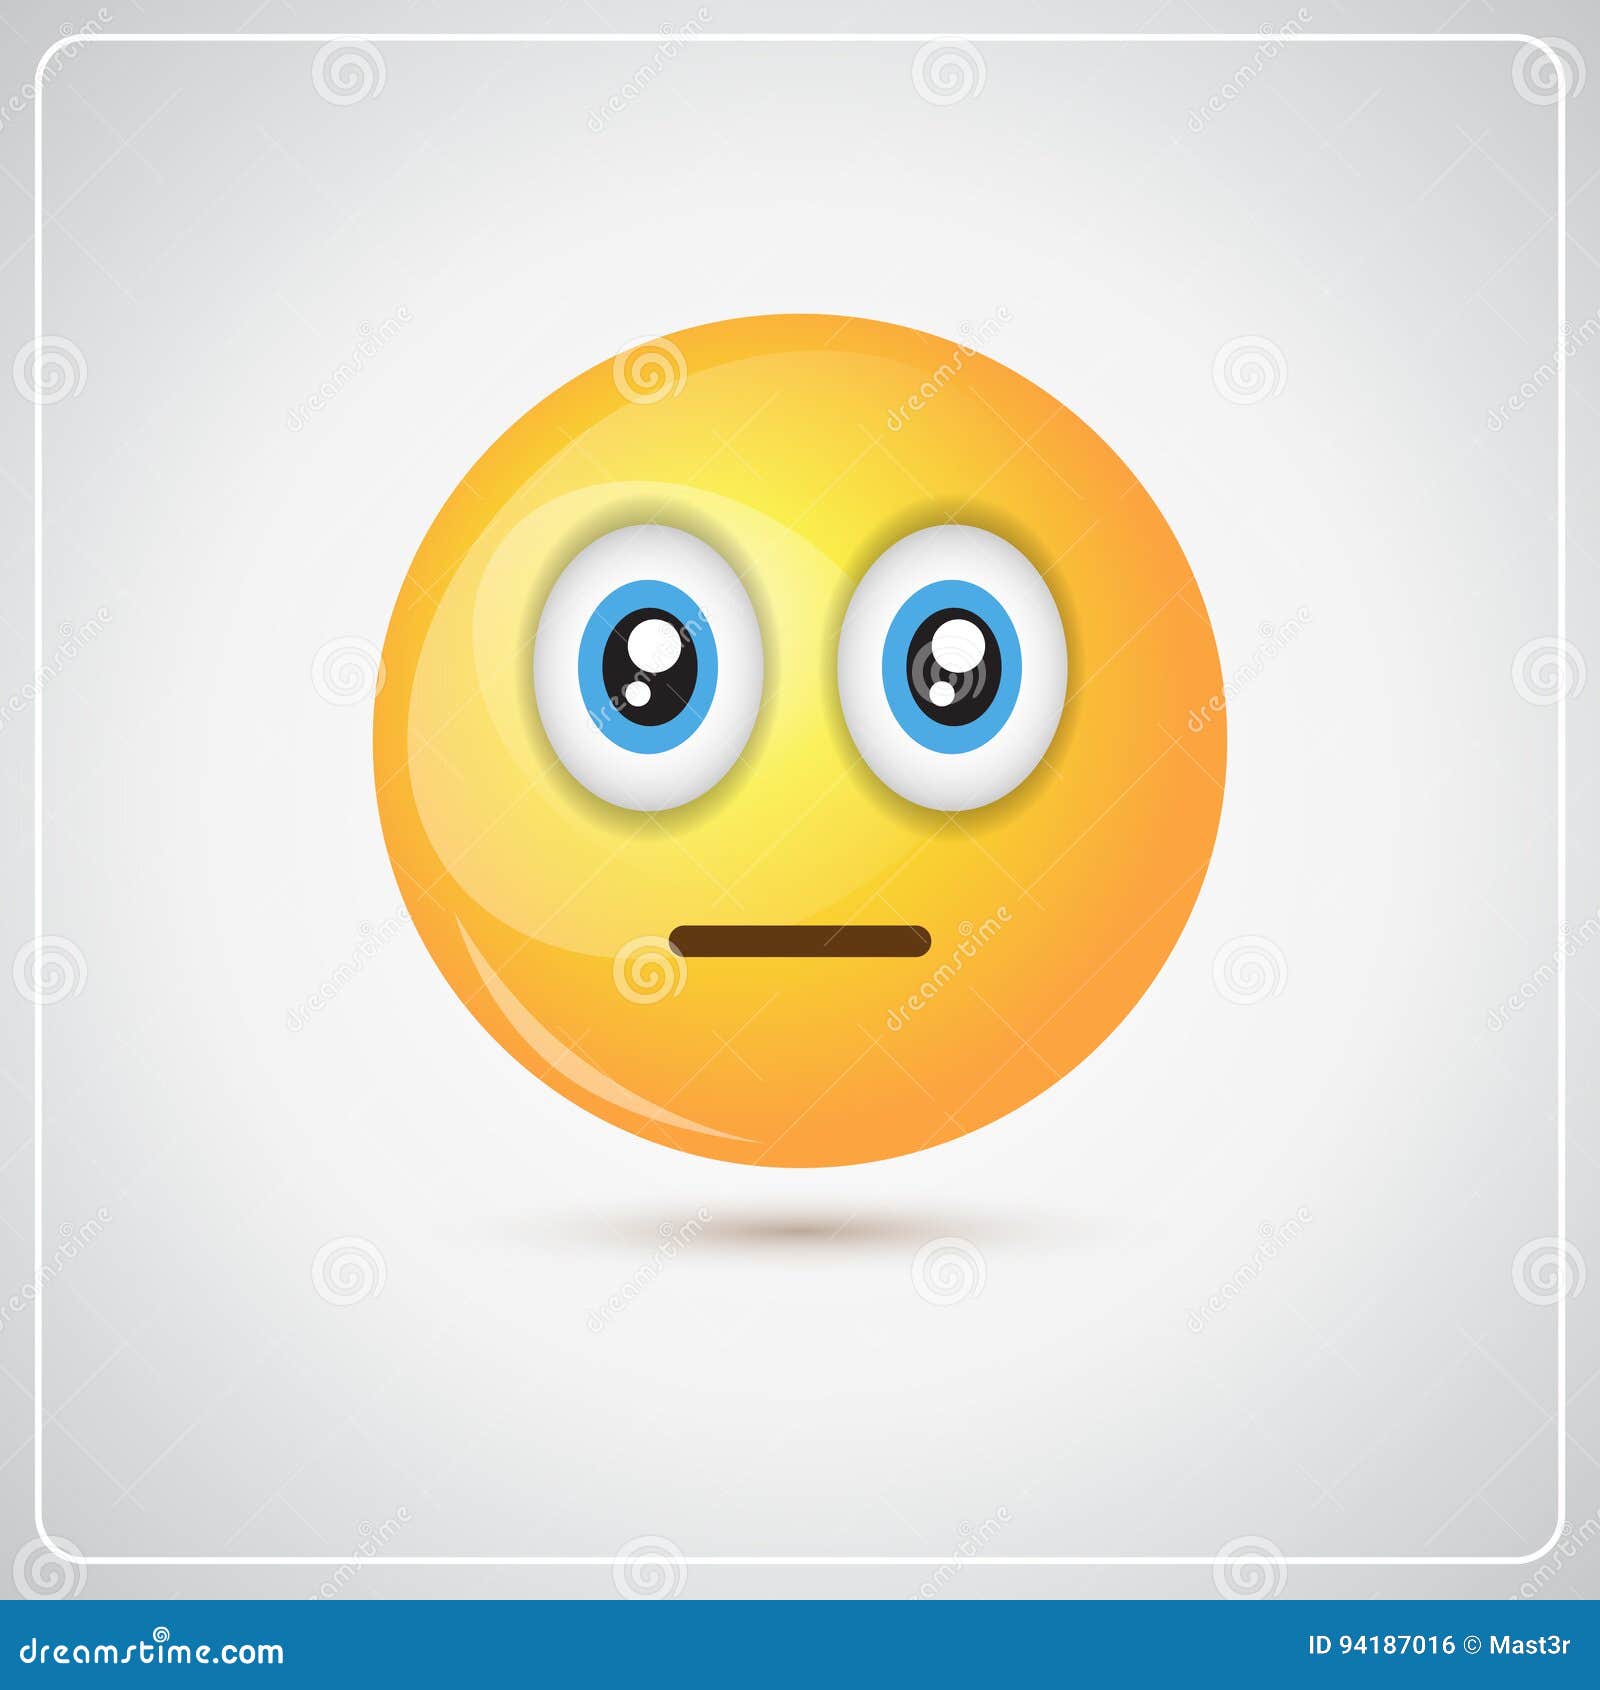 Yellow Cartoon Face Shocked People Emotion Icon Stock Vector